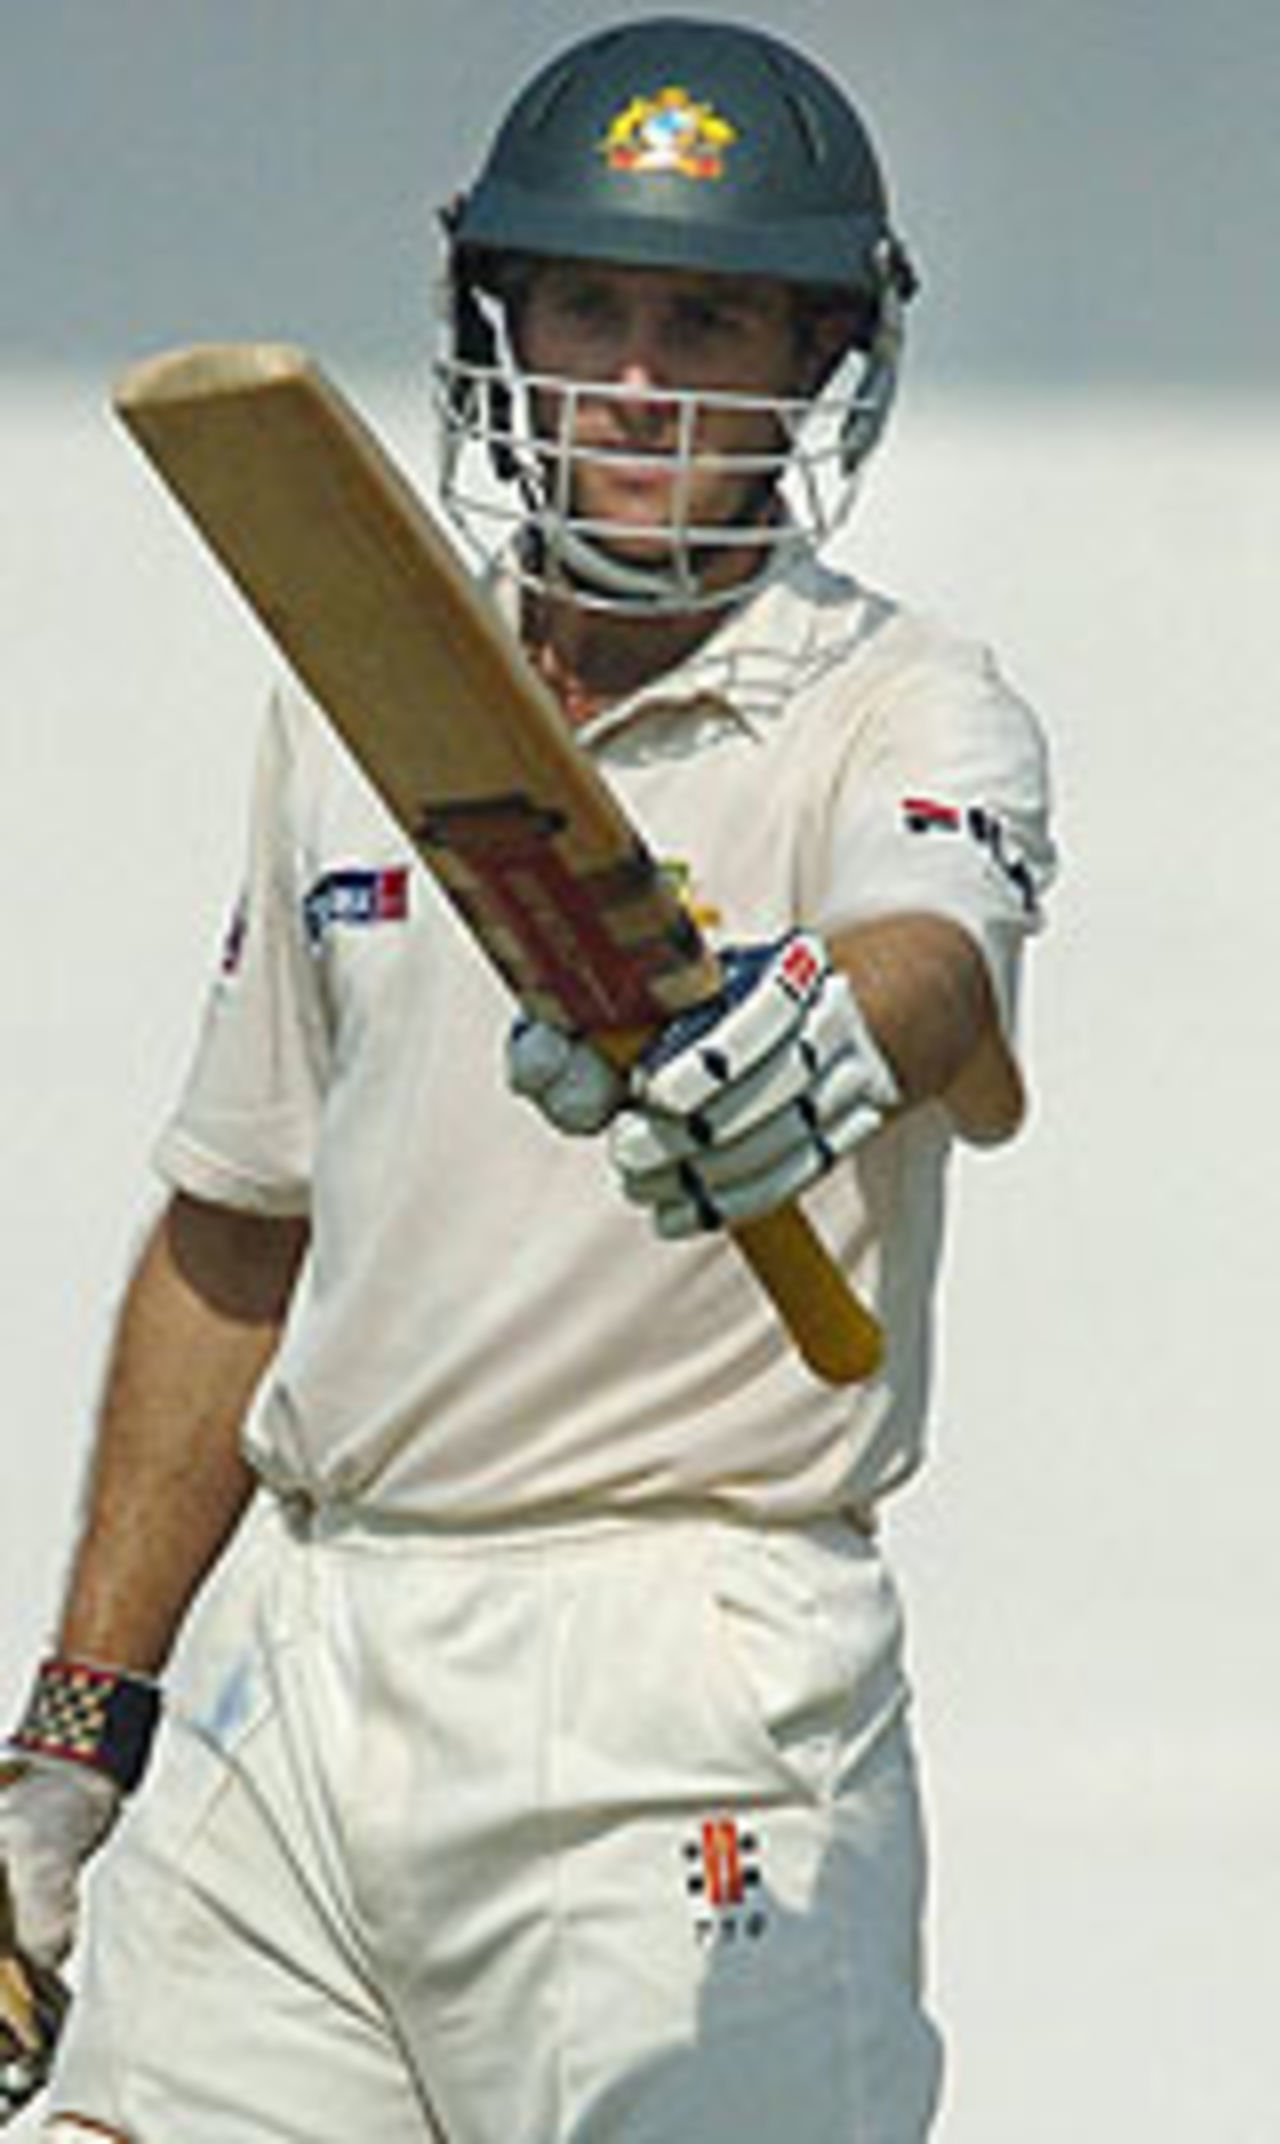 Simon Katich acknowledges the applause after reaching his half-century, India v Australia, 3rd Test, Nagpur, October 28 2004